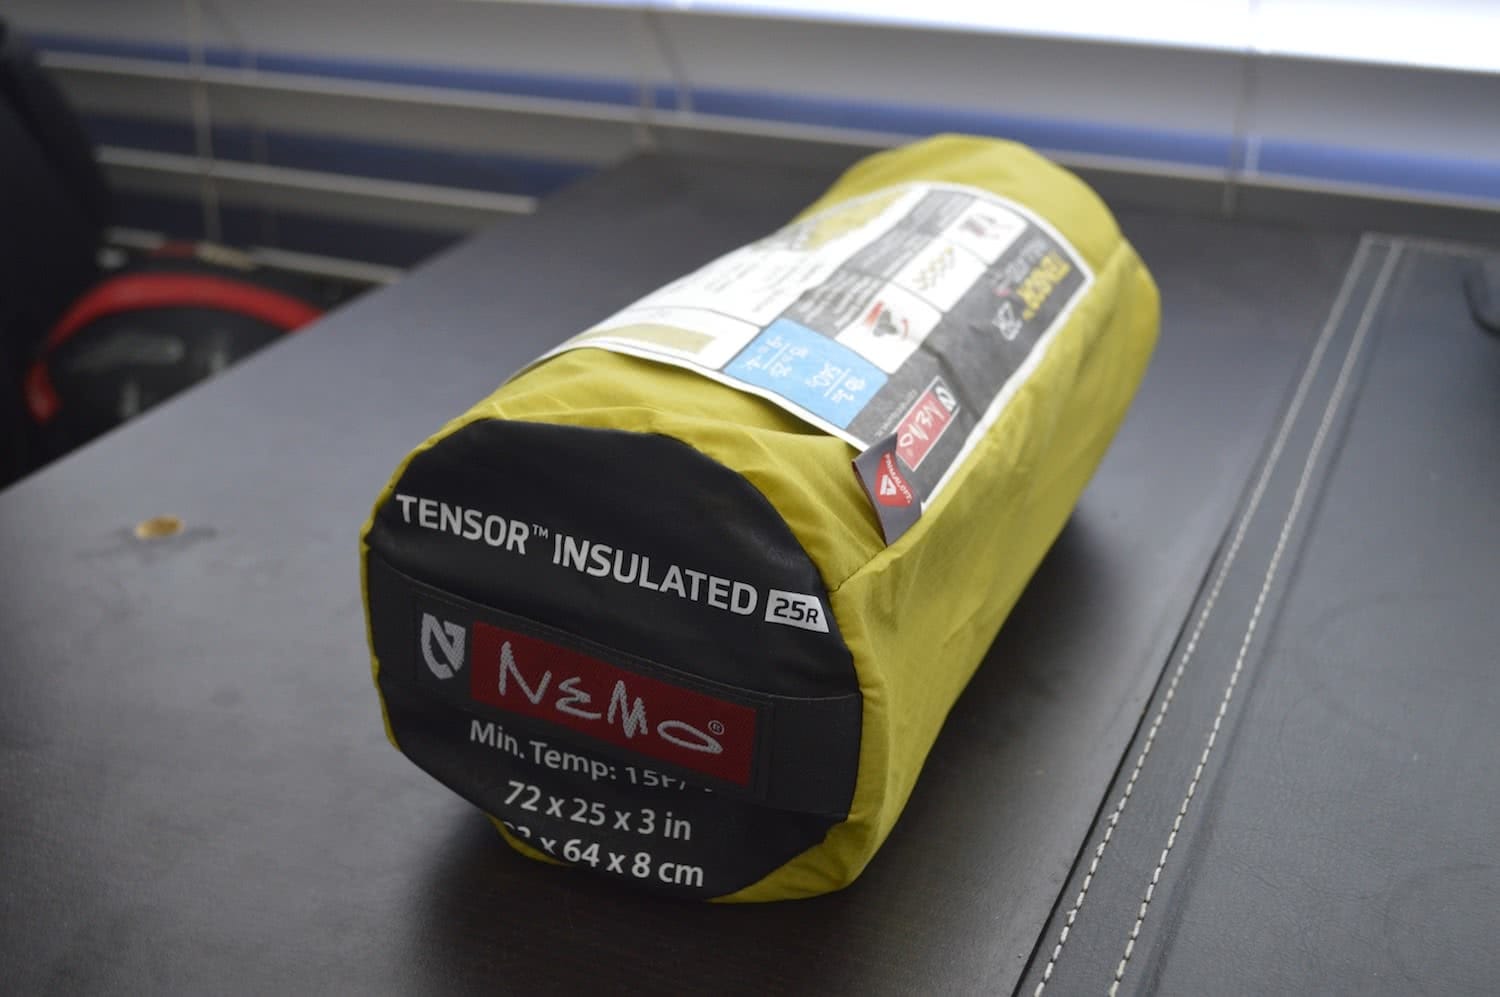 tim ashelford, nemo tensor 25r insulated review, sleeping, air pad, gear, packed